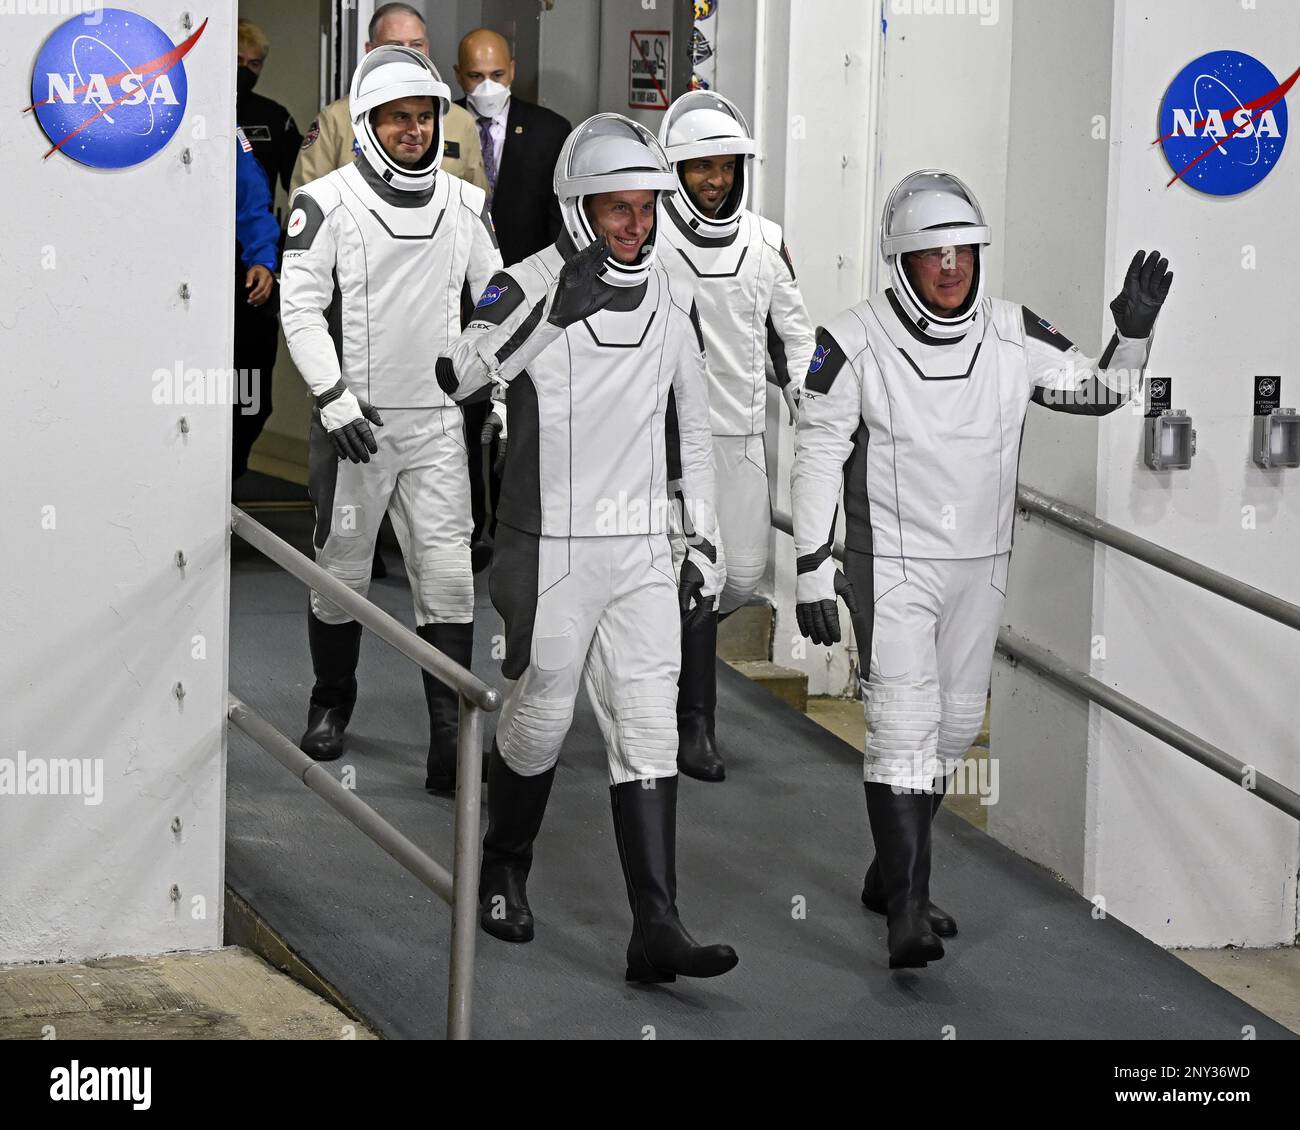 NASA Astronauts Warren Hoburg and Stephen Bowen (front l and r), followed by Russian Cosmonaut Andrey Fedayev and UAE Astronaut Sultan Al Neyadi (rear l to r) walk out from the Neil Armstrong Operations and Checkout Building at the Kennedy Space Center, Florida on Sunday, February 26, 2023.The crew will be launched to the International Space Station on the SpaceX Crew Dragon spacecraft. Photo by Joe Marino/UPI Credit: UPI/Alamy Live News Stock Photo